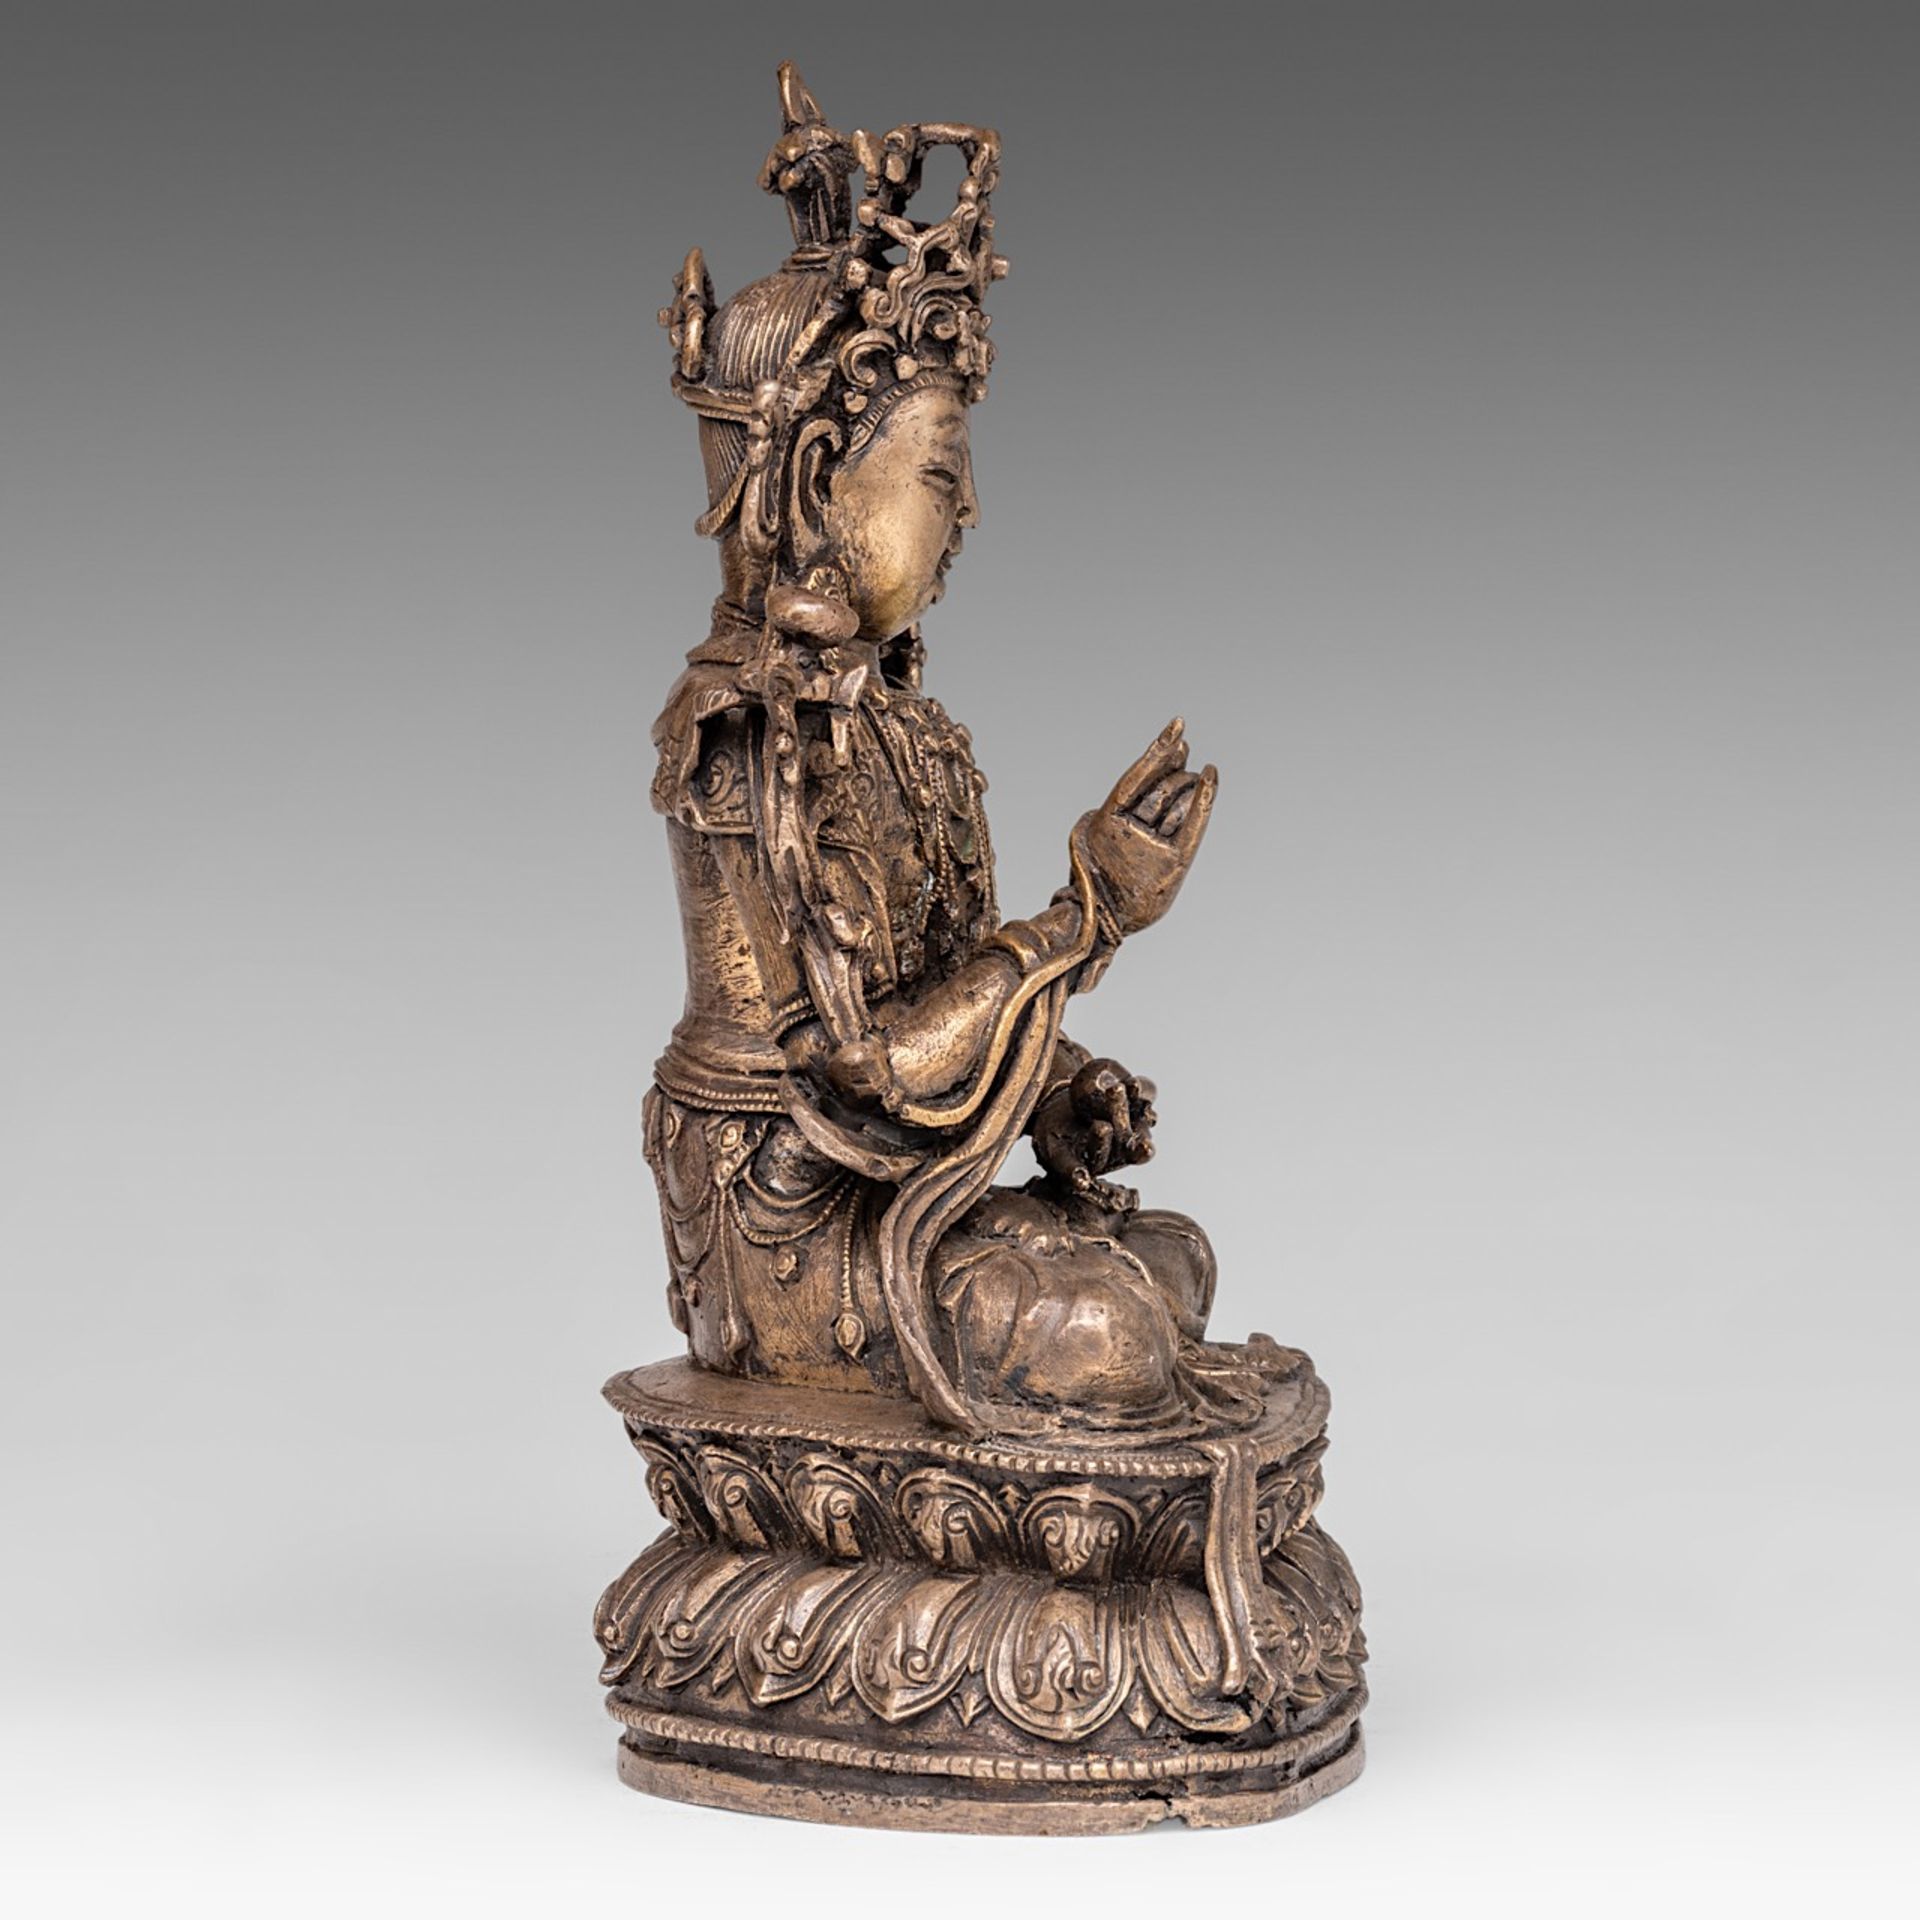 A Chinese copper alloy figure of a seated Bodhisattva Manjushri, H 26,2 cm - Weight, 2444 g - Image 5 of 7